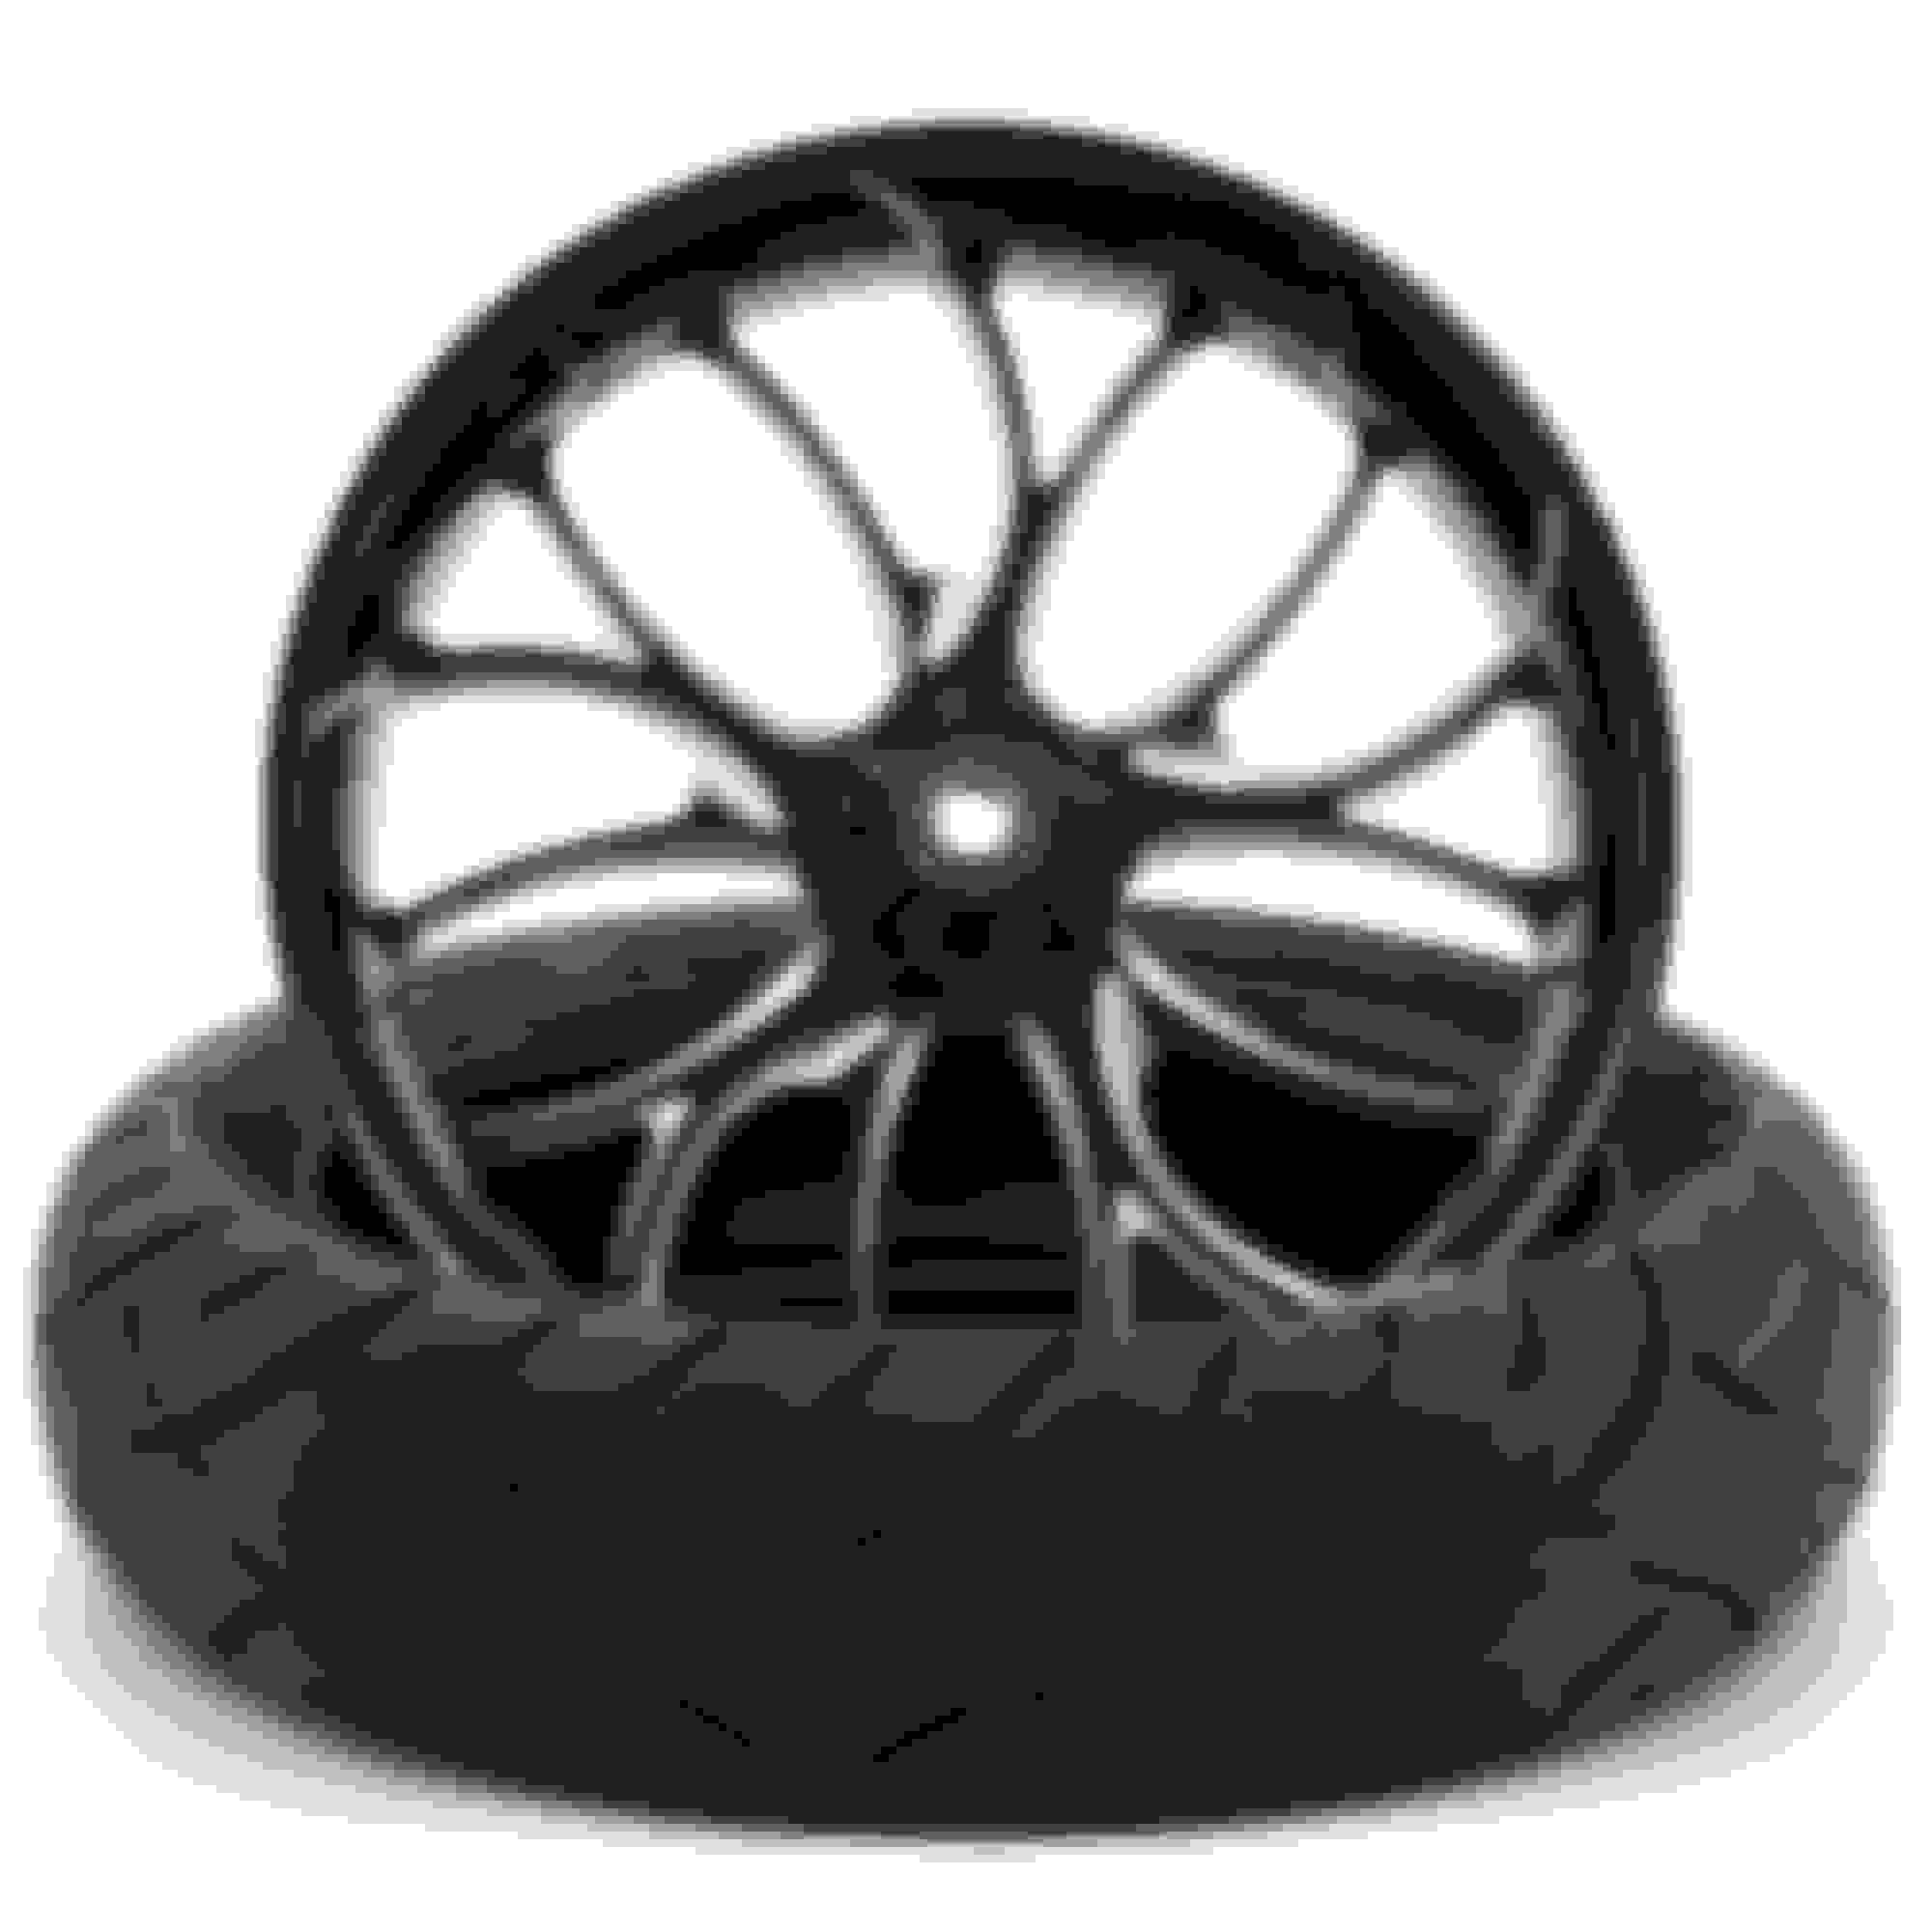 18 x 5.5" 180/55-18 Front Wheel & Tire IN STOCK - Harley Davidson Forums